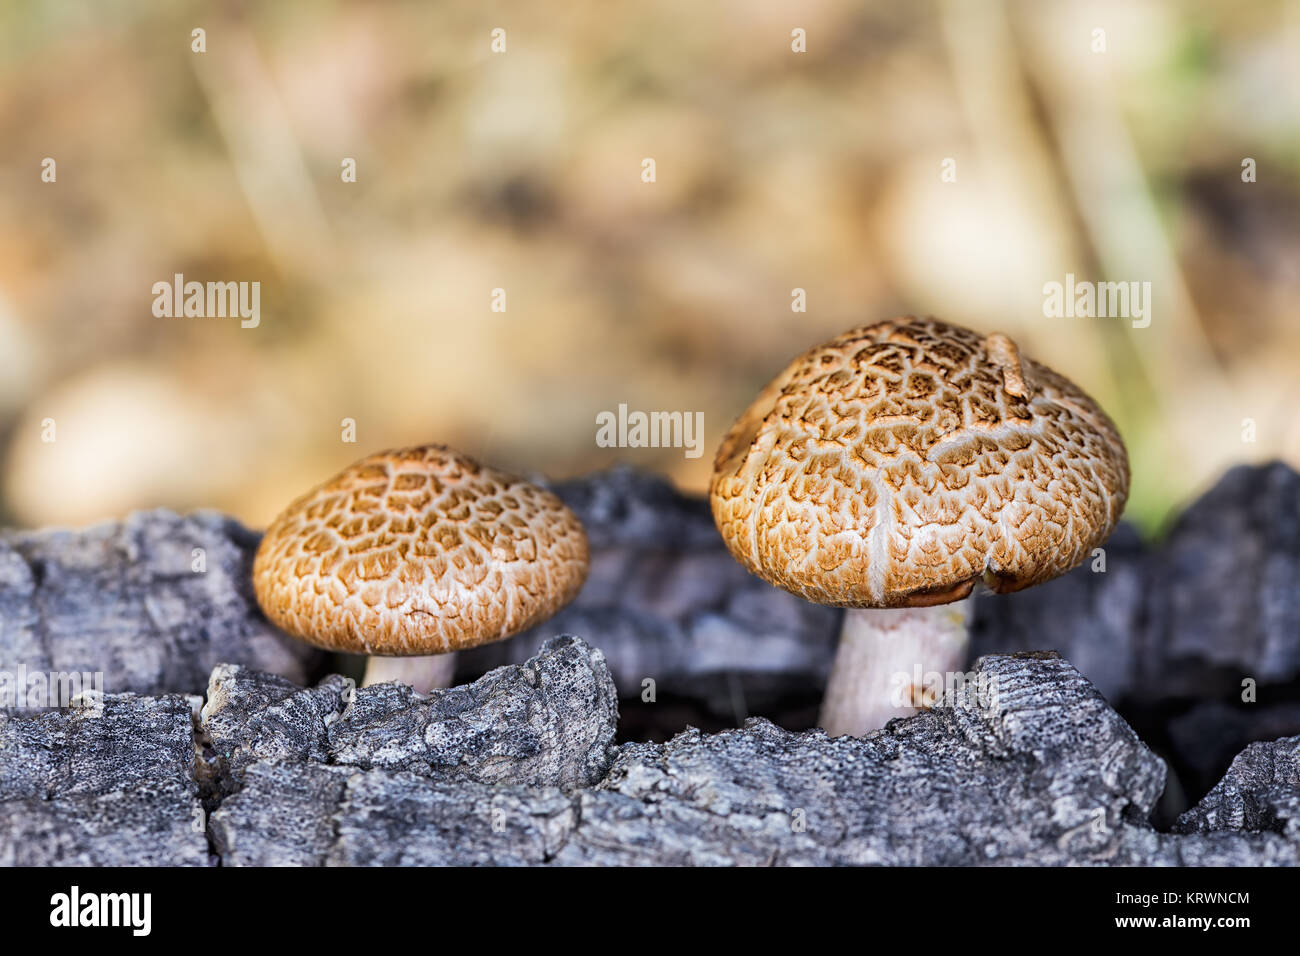 Two small mushrooms growing on old wood Stock Photo